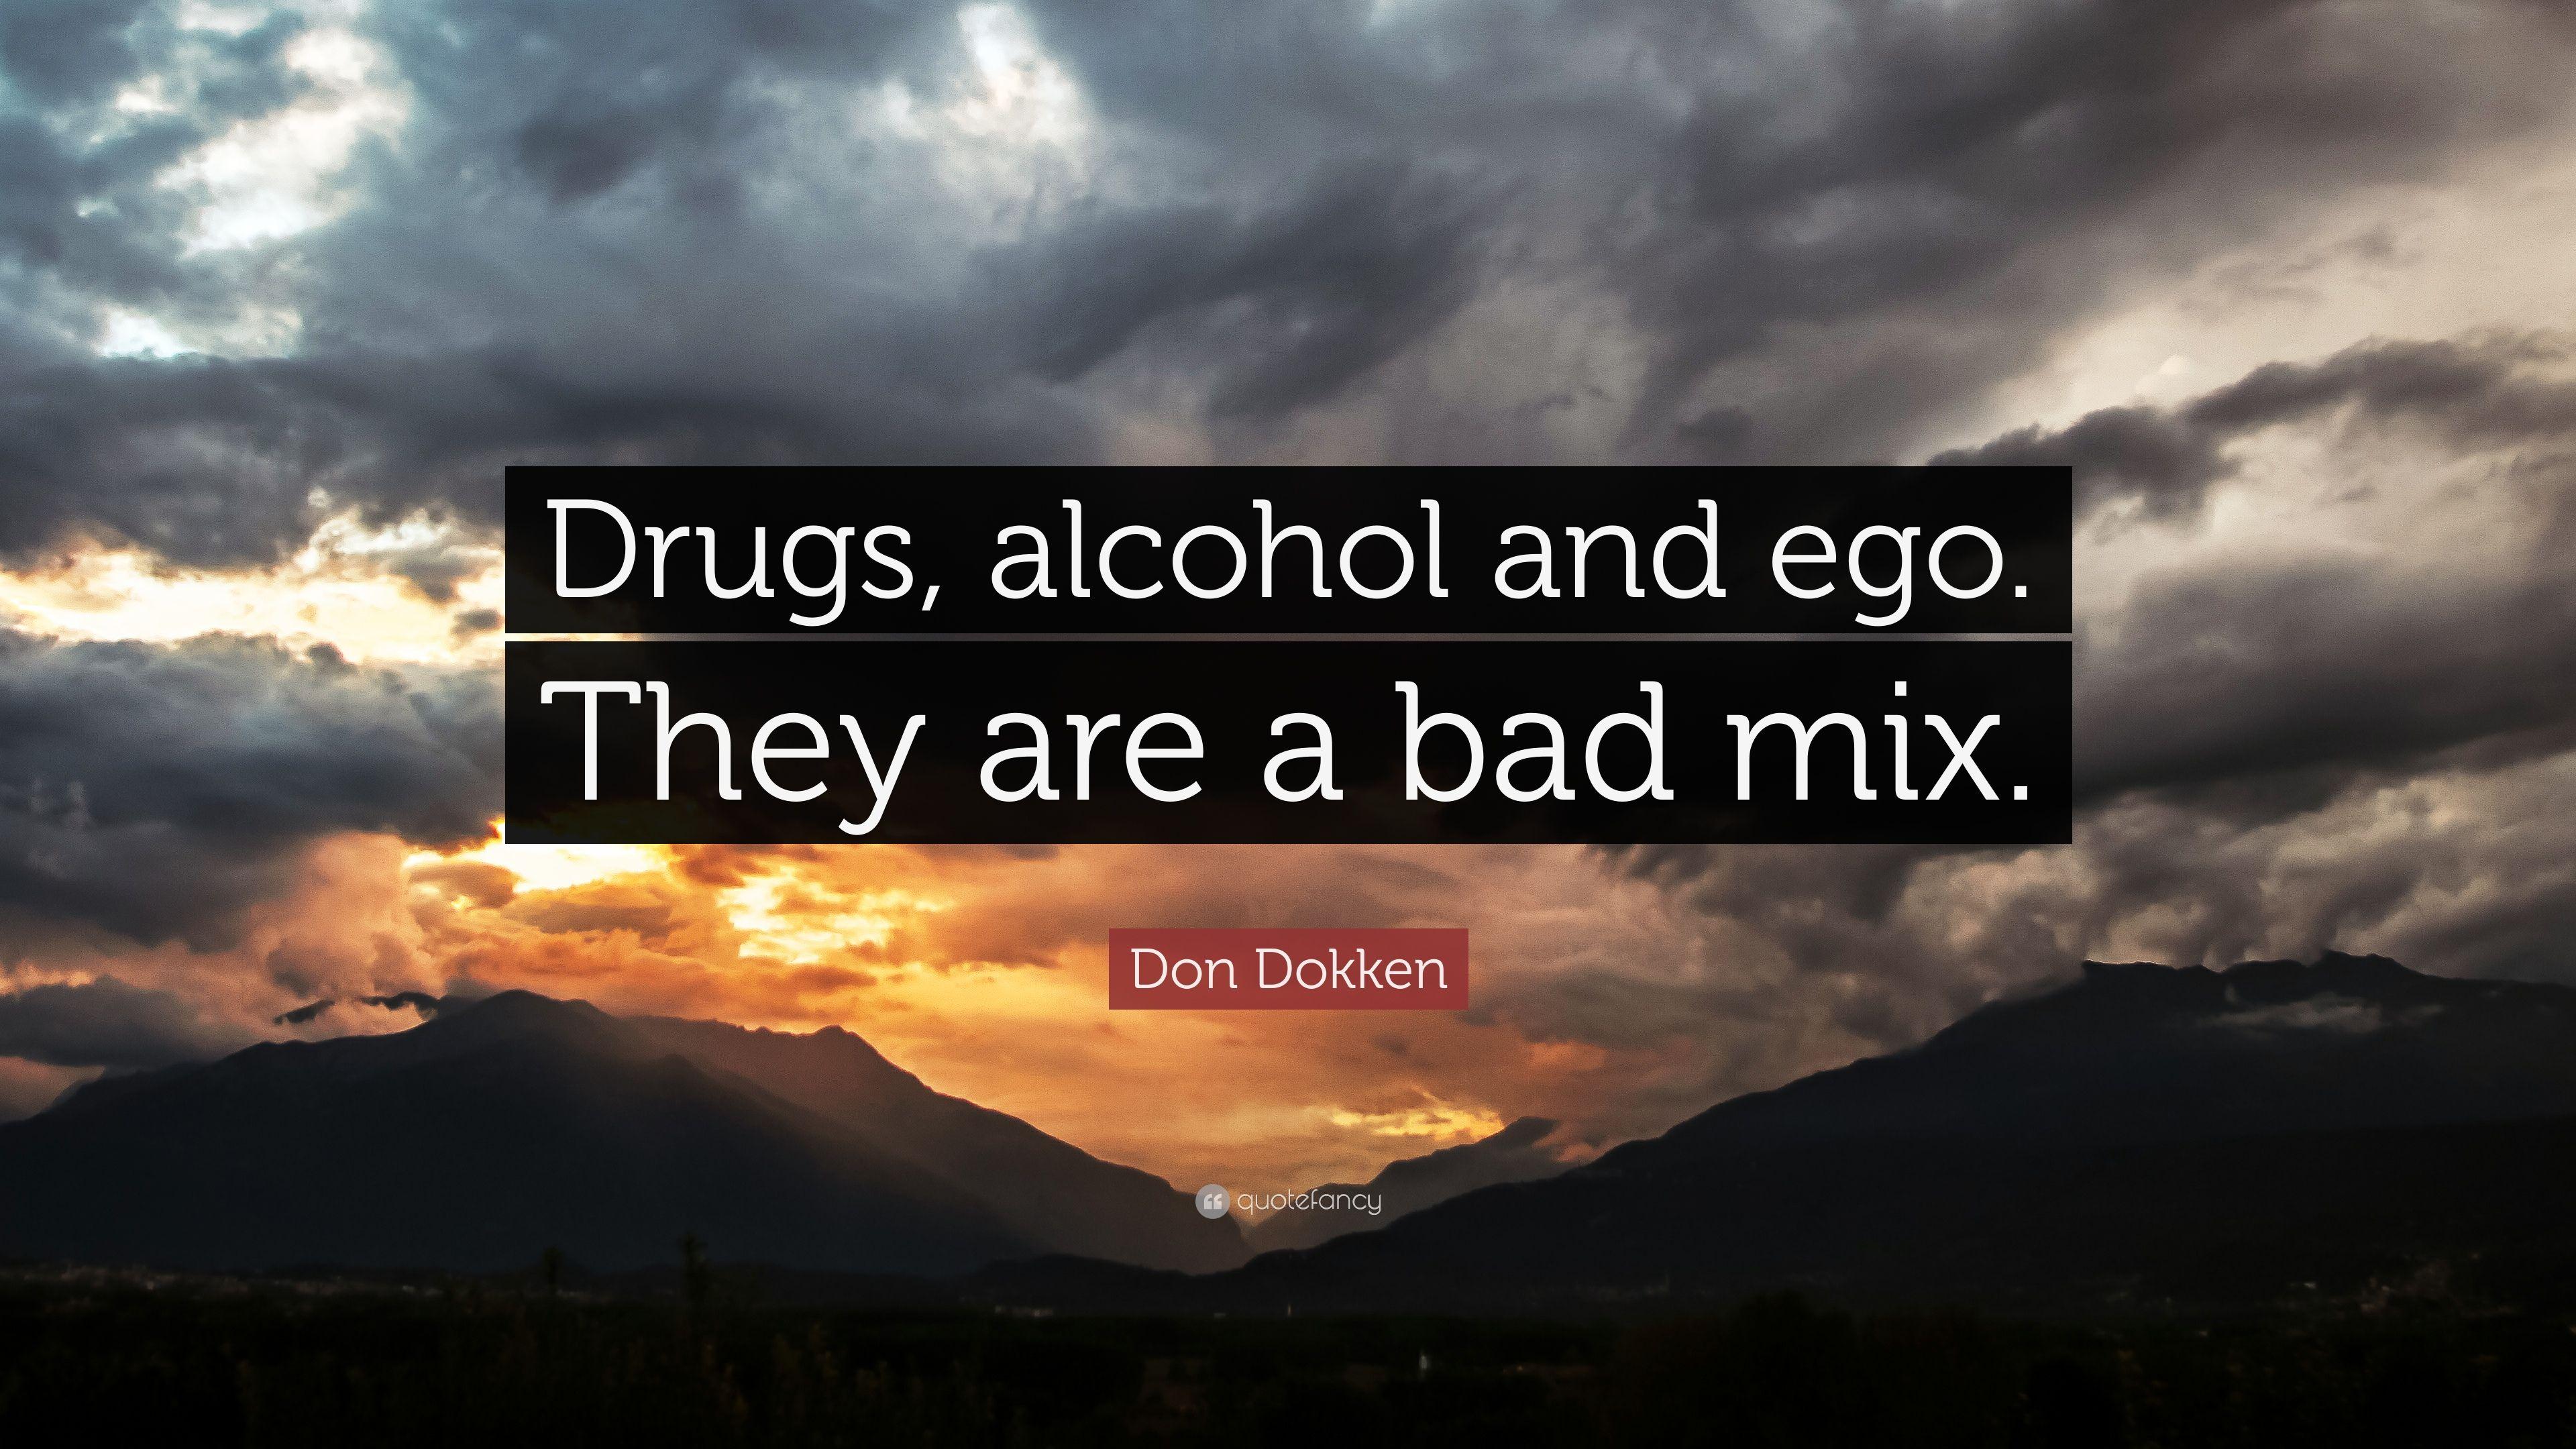 Don Dokken Quote: “Drugs, alcohol and ego. They are a bad mix